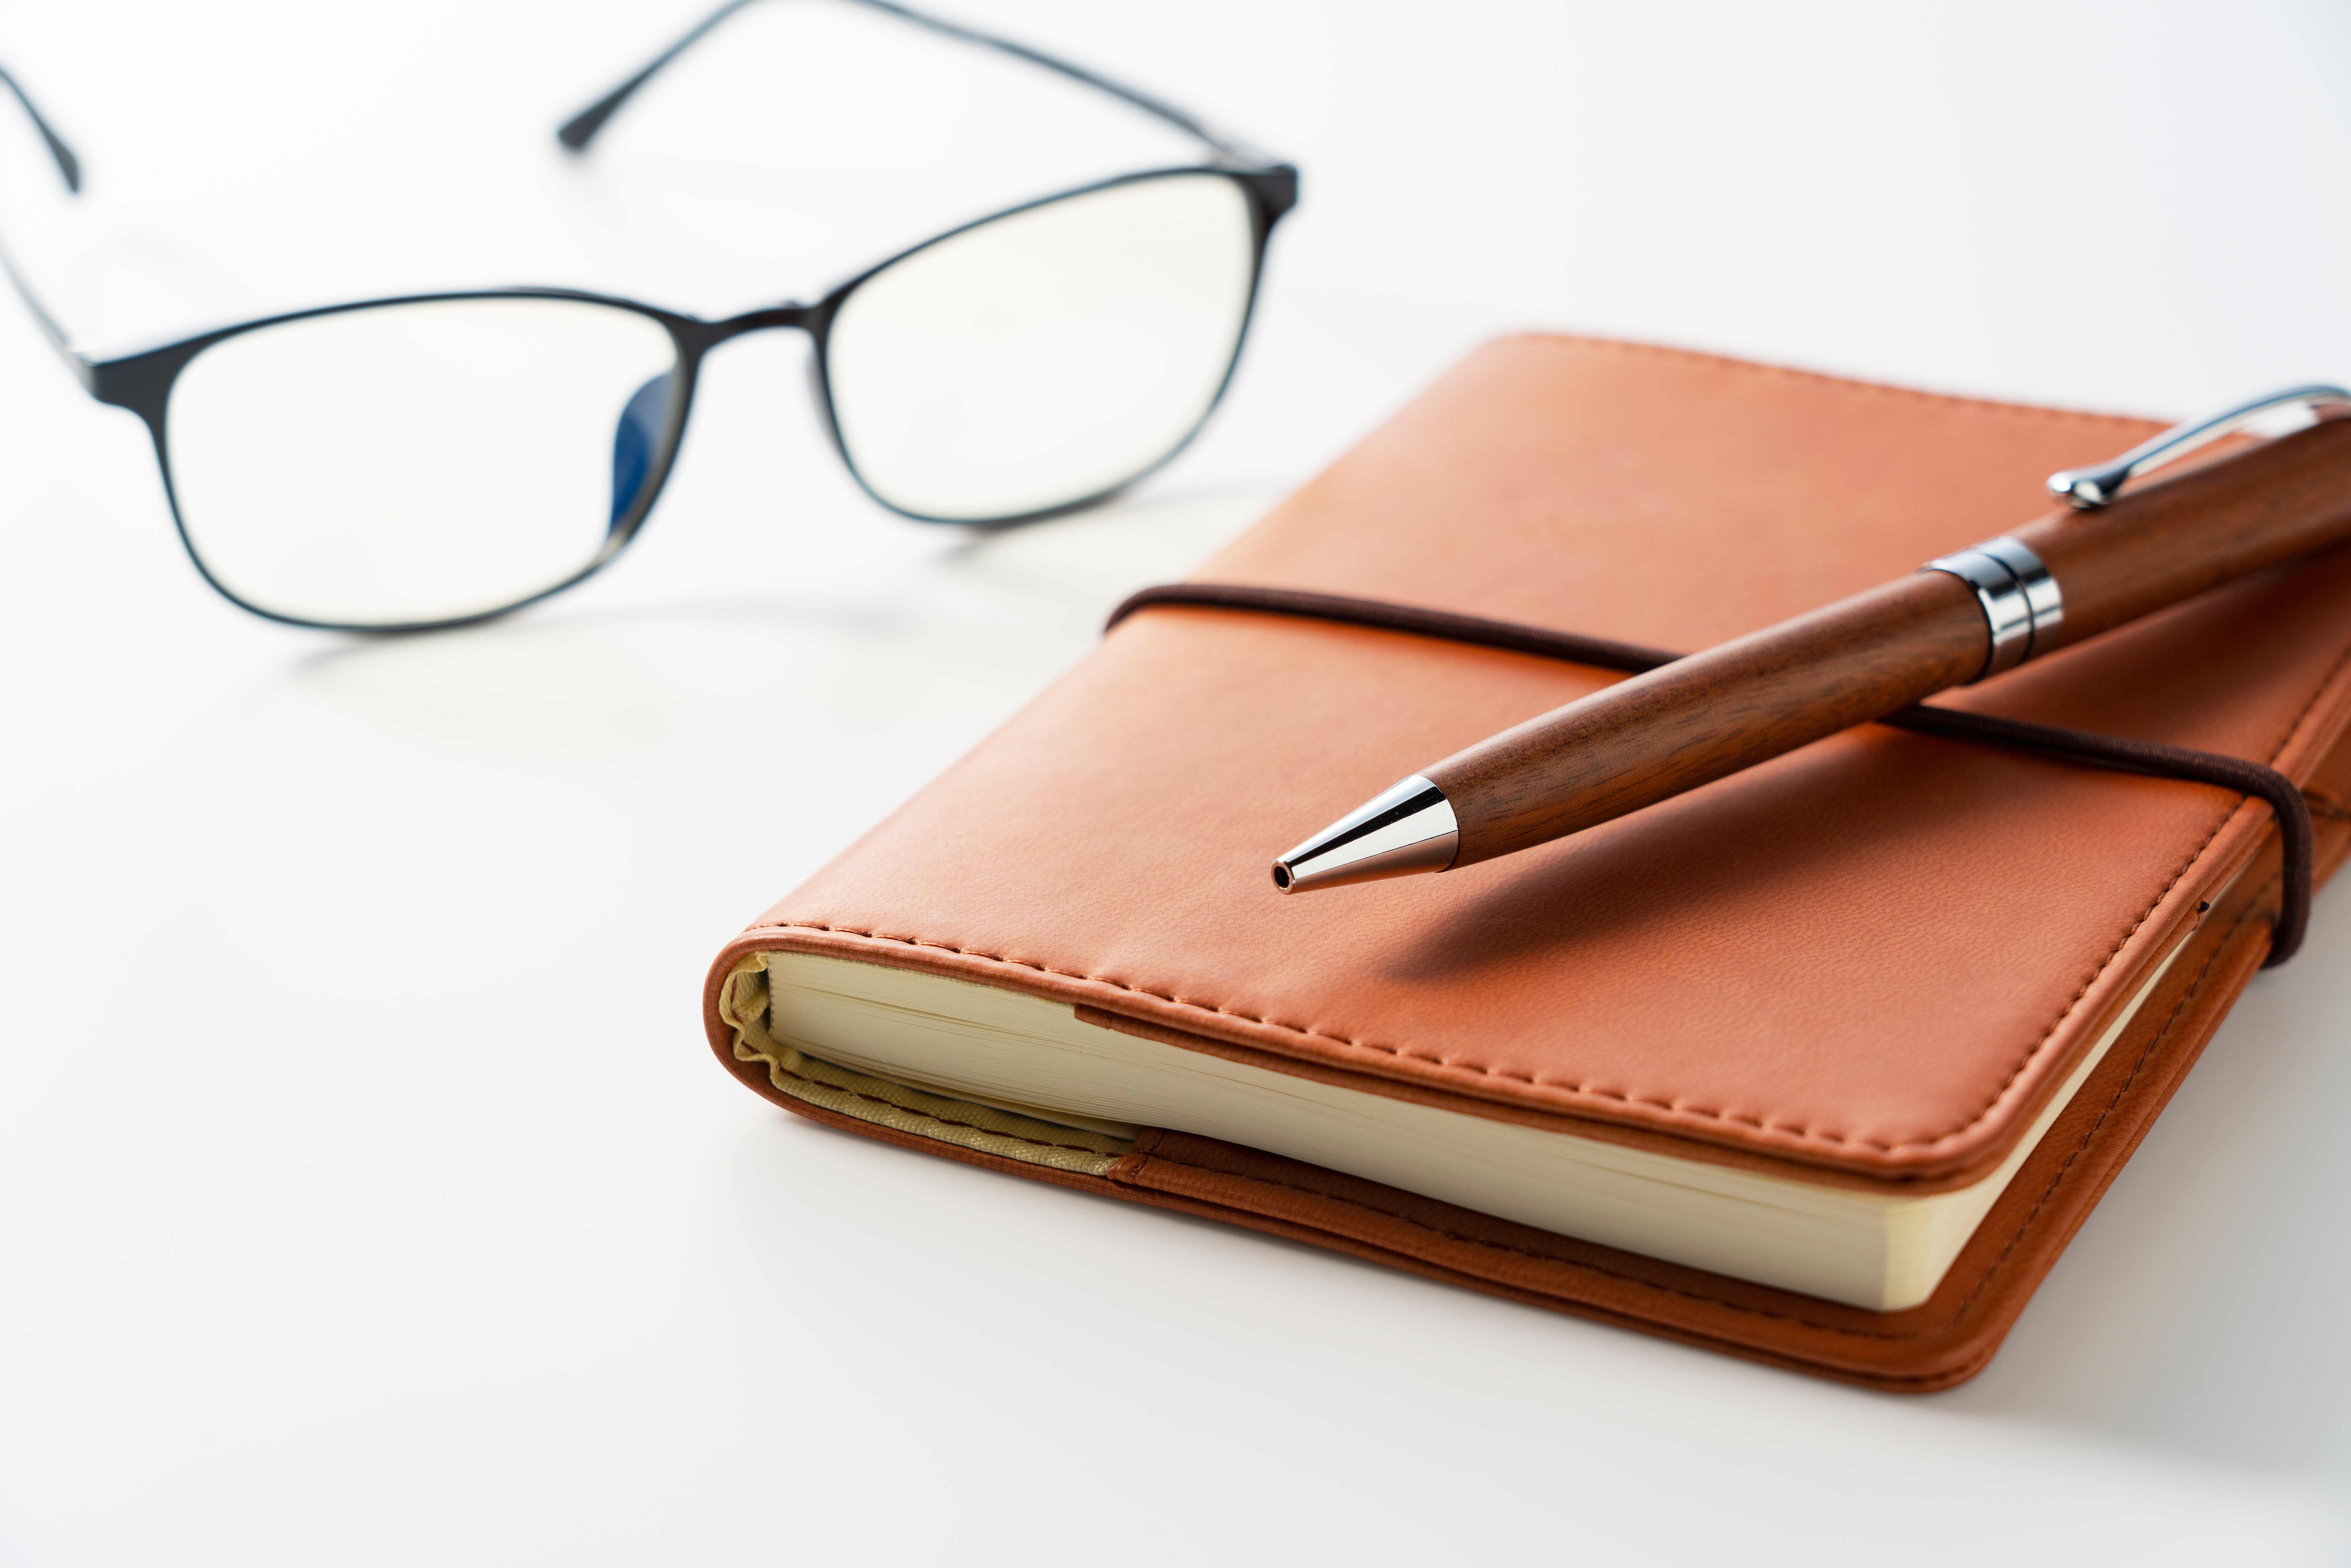 A luxurious leather journal makes a wonderful graduation gift.